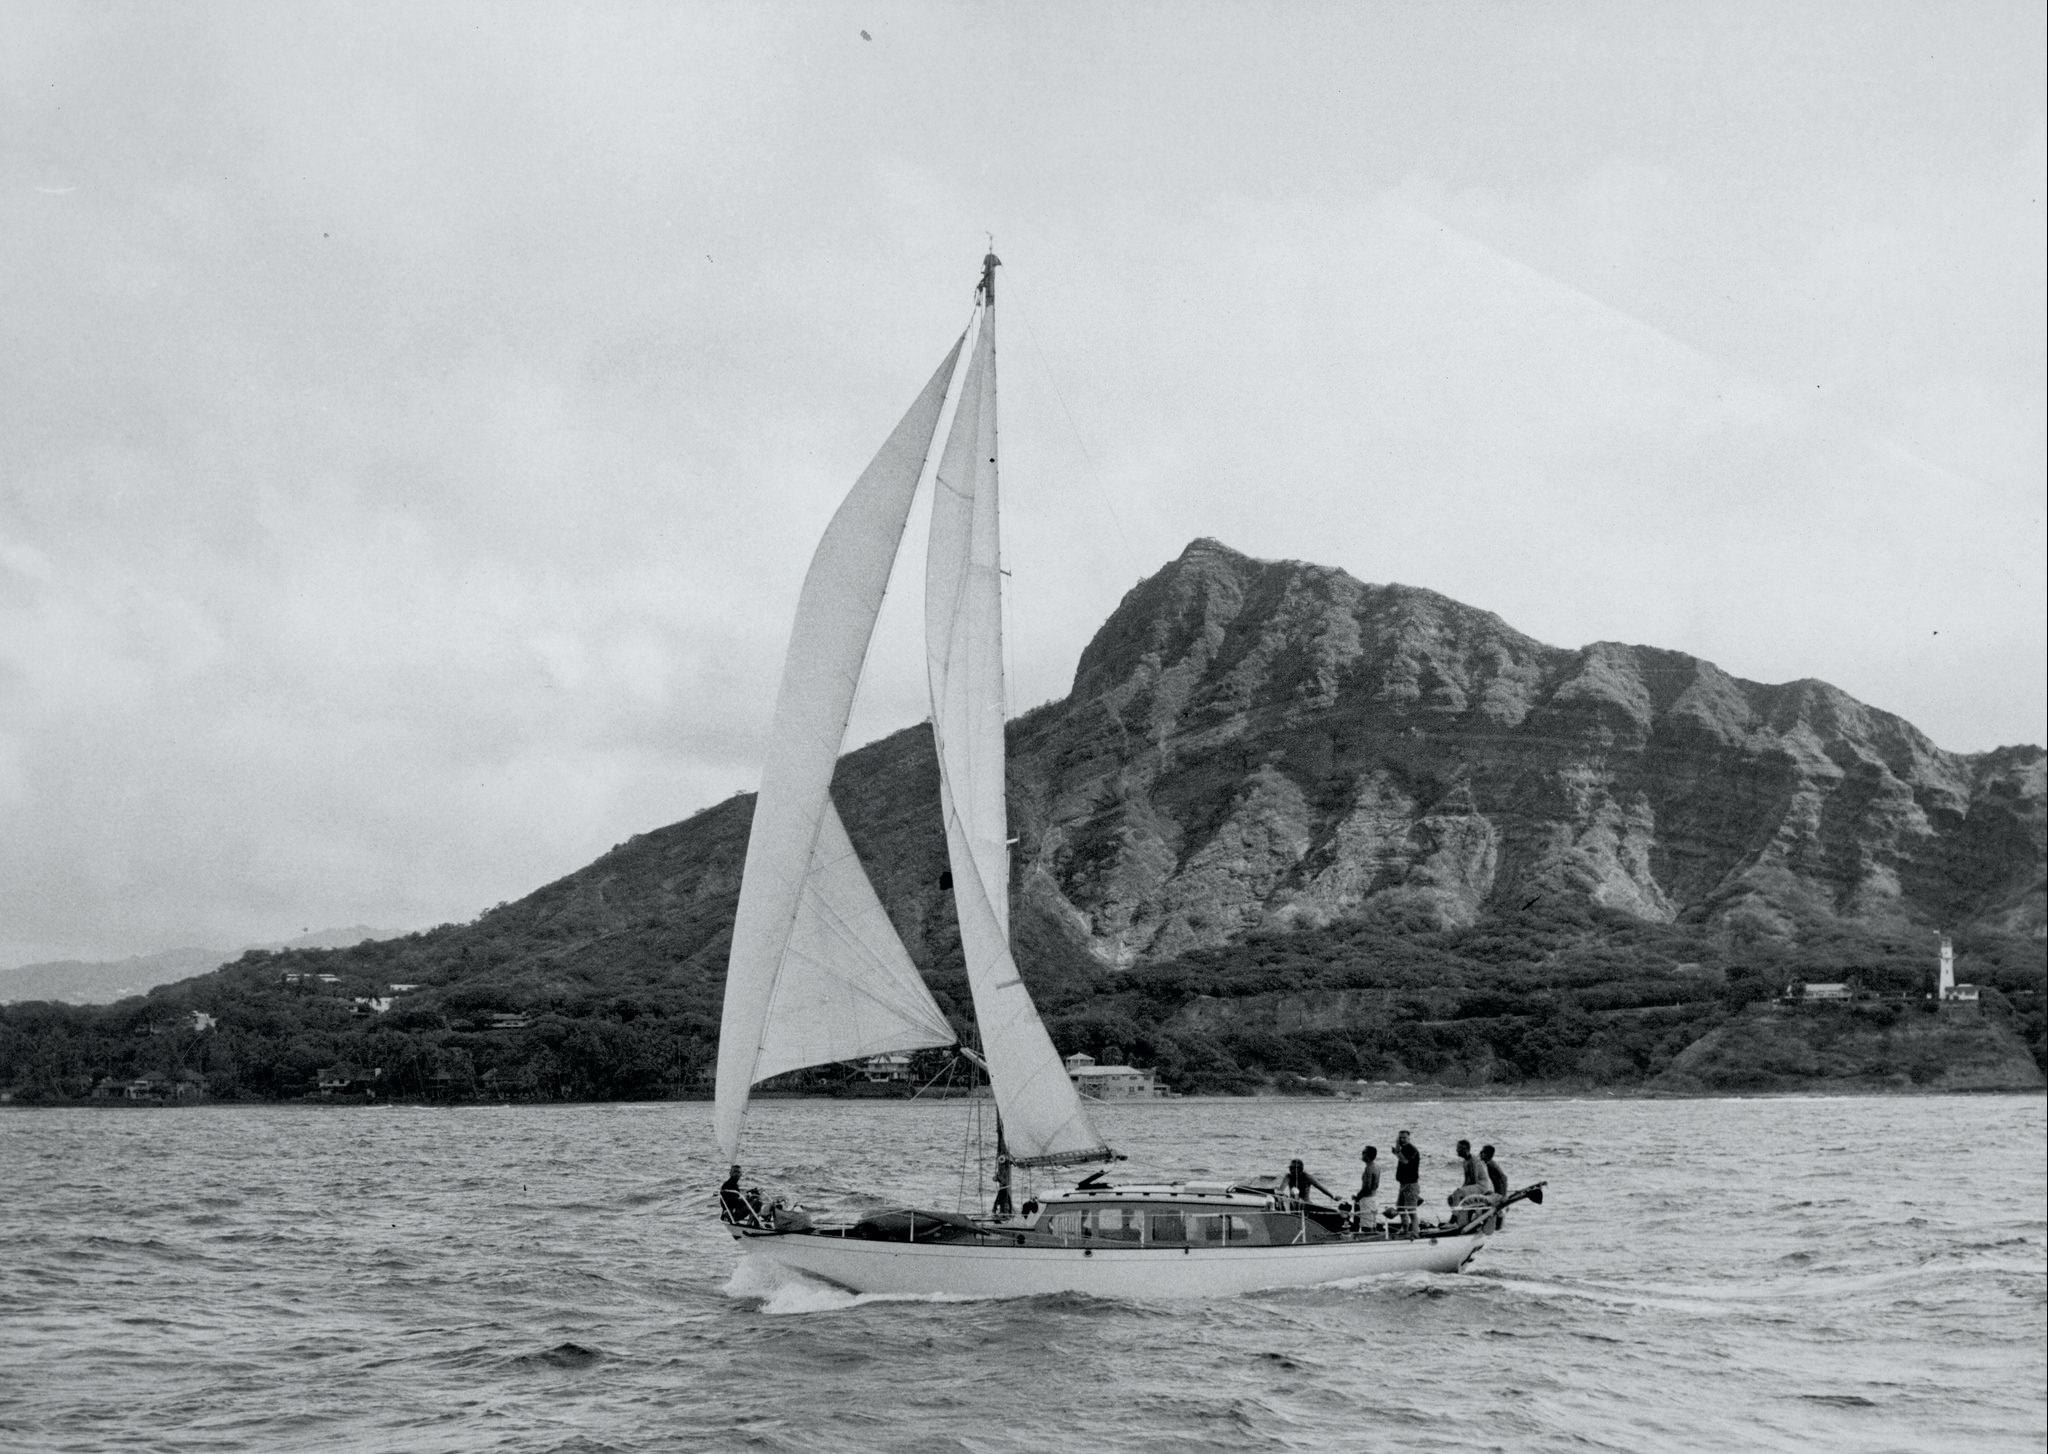 The Barn Door Trophy, awarded to the crew of the fastest monotype, was given to the Ticonderoga team led by Robert Johnson. The boat covered the route in 11 days, 16 hours, 46 minutes and 33 seconds. During the next regatta, in 1965, Ticonderoga time will improve by 2 days and 3 hours (9 days, 13 hours, 51 minutes, 2 seconds). This will be the new official Transpac record set for the first time since 1955. For another 3 hours, this time will be improved in 1969, but, however, already by the Blackfin team. 